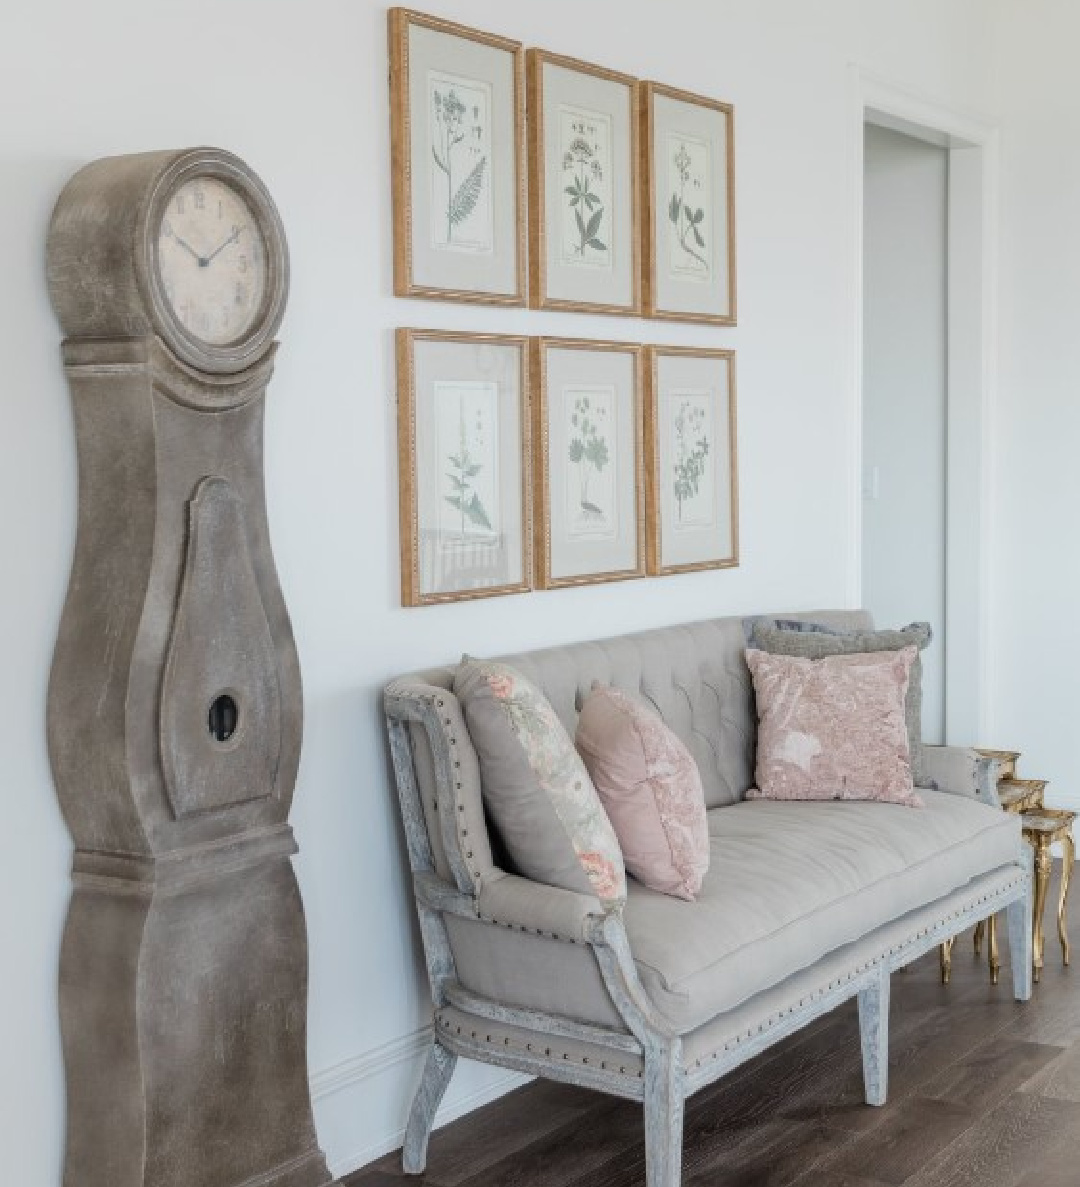 Country French landing with botanical prints, Mora clock and settee in a new build in Texas - Brit Jones Design. #countryfrench #botanicalprints